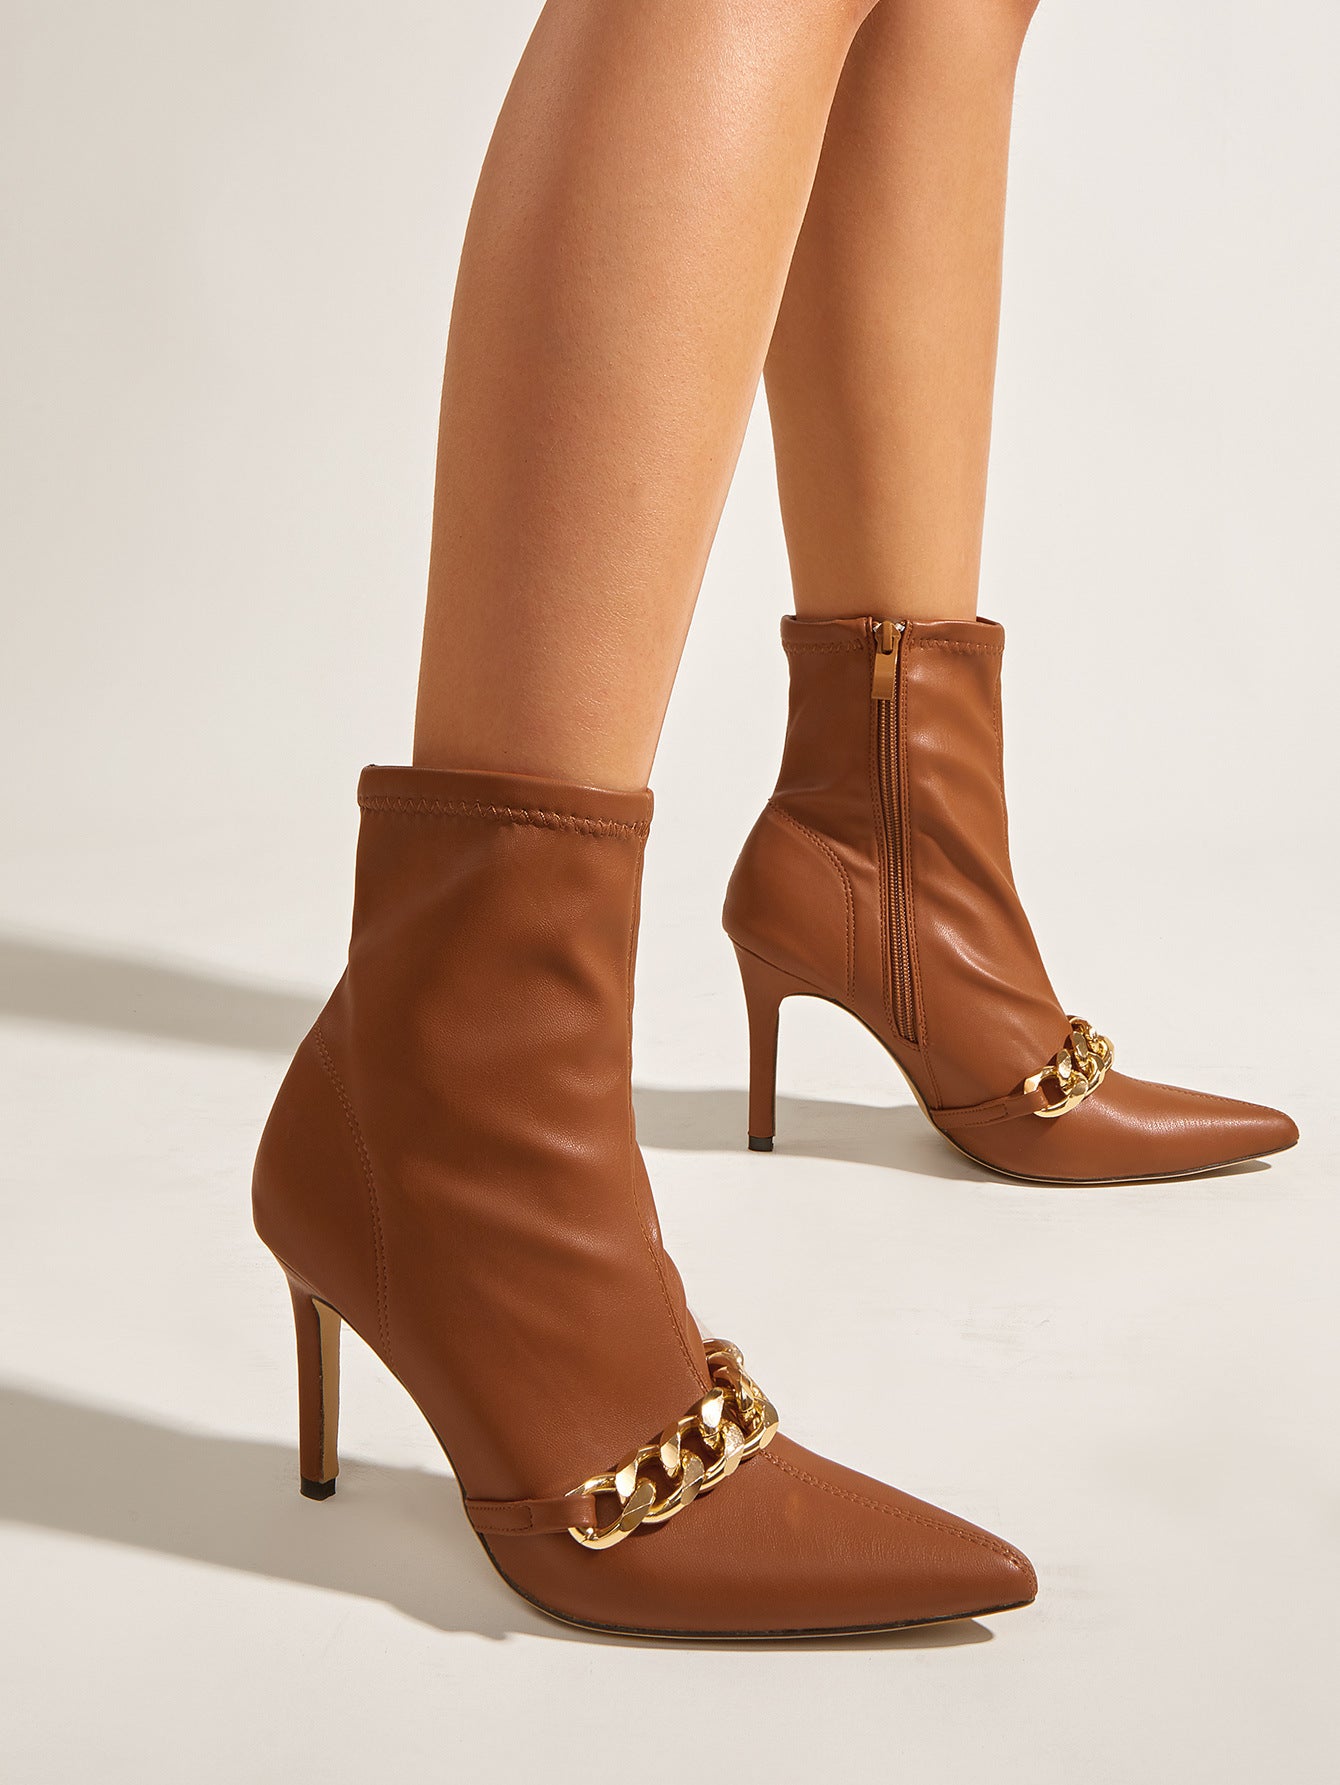 Sam Edelman Sylvia Knee High Boot | Women's Boots and Booties